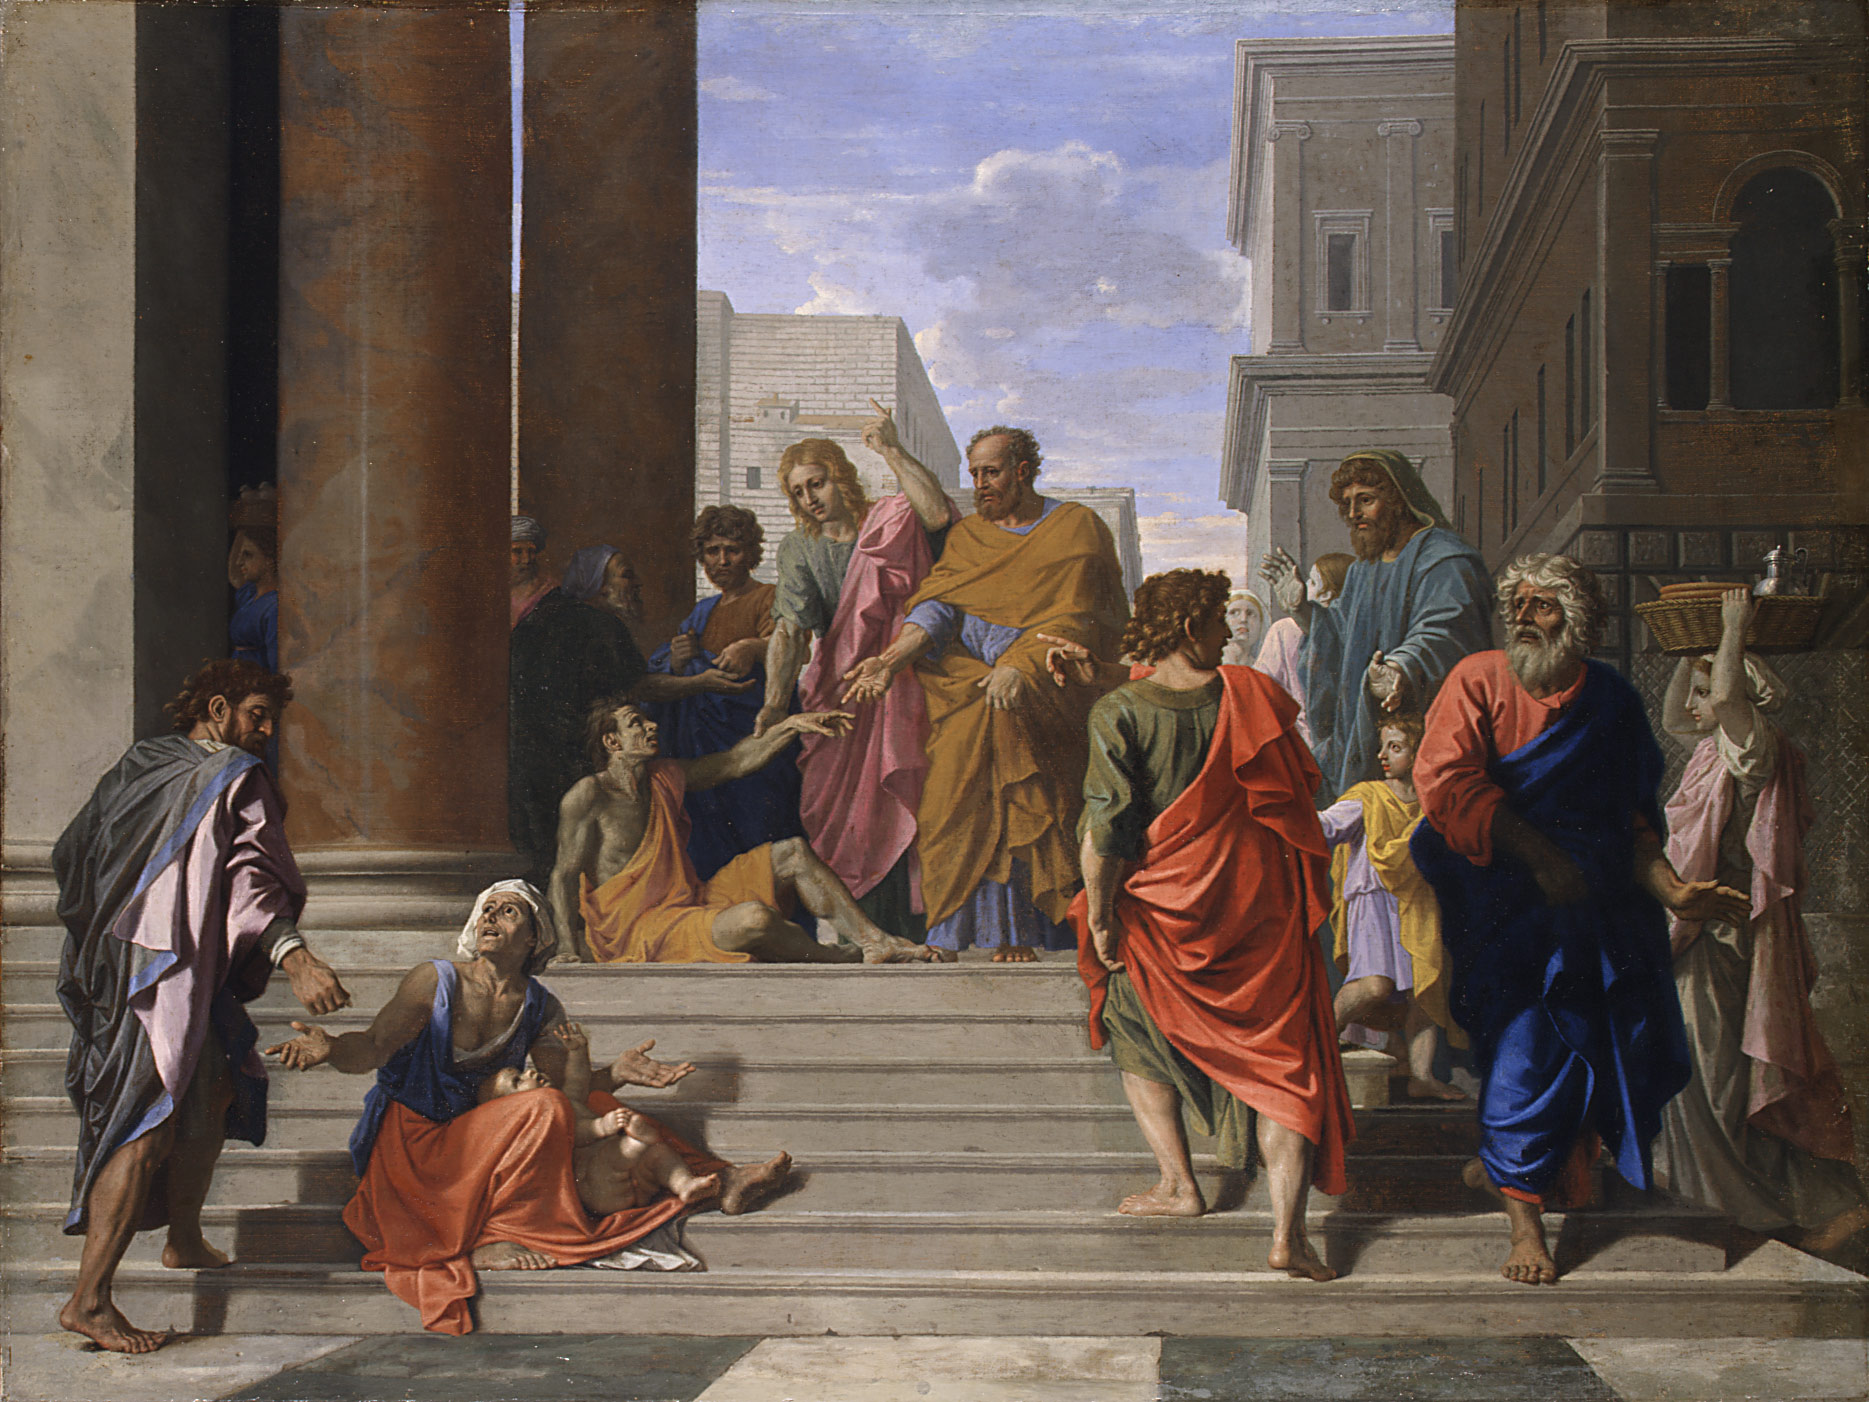 Saint Peter and John Healing the Beggar, by Nicolas Poussin